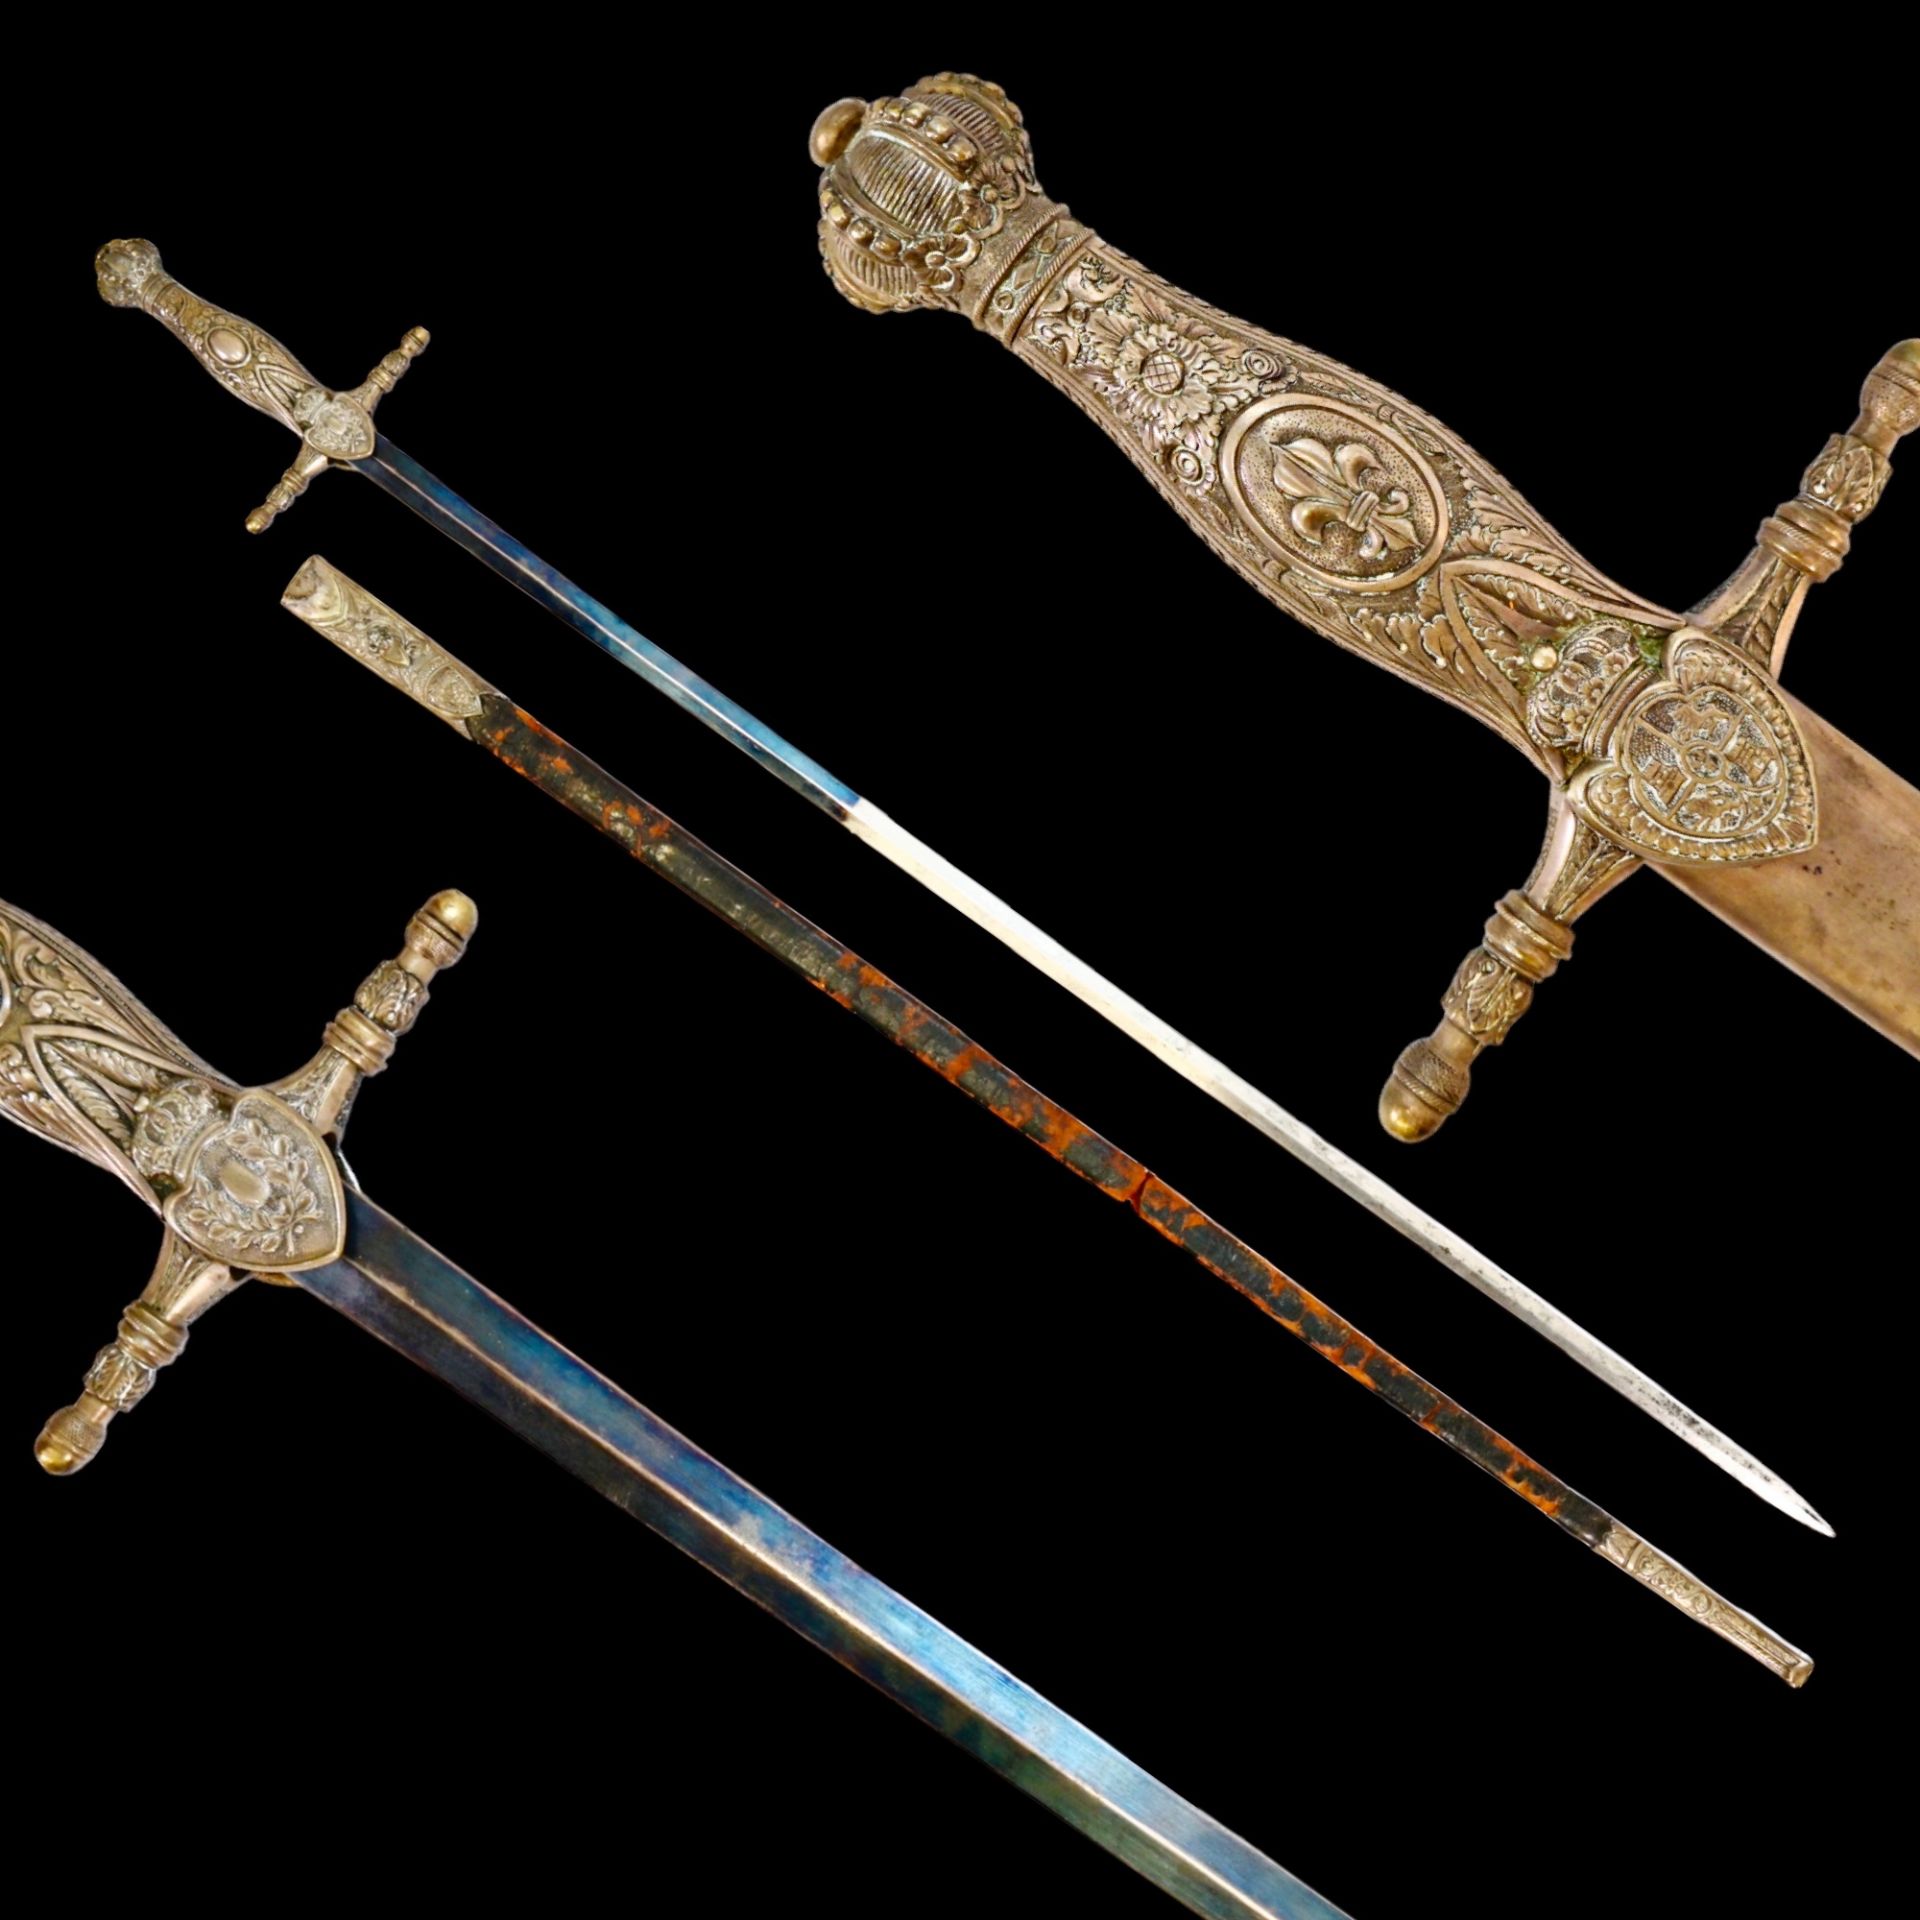 Rare Spanish small sword with scabbard, bronze hilt and blued blade, 19th century.